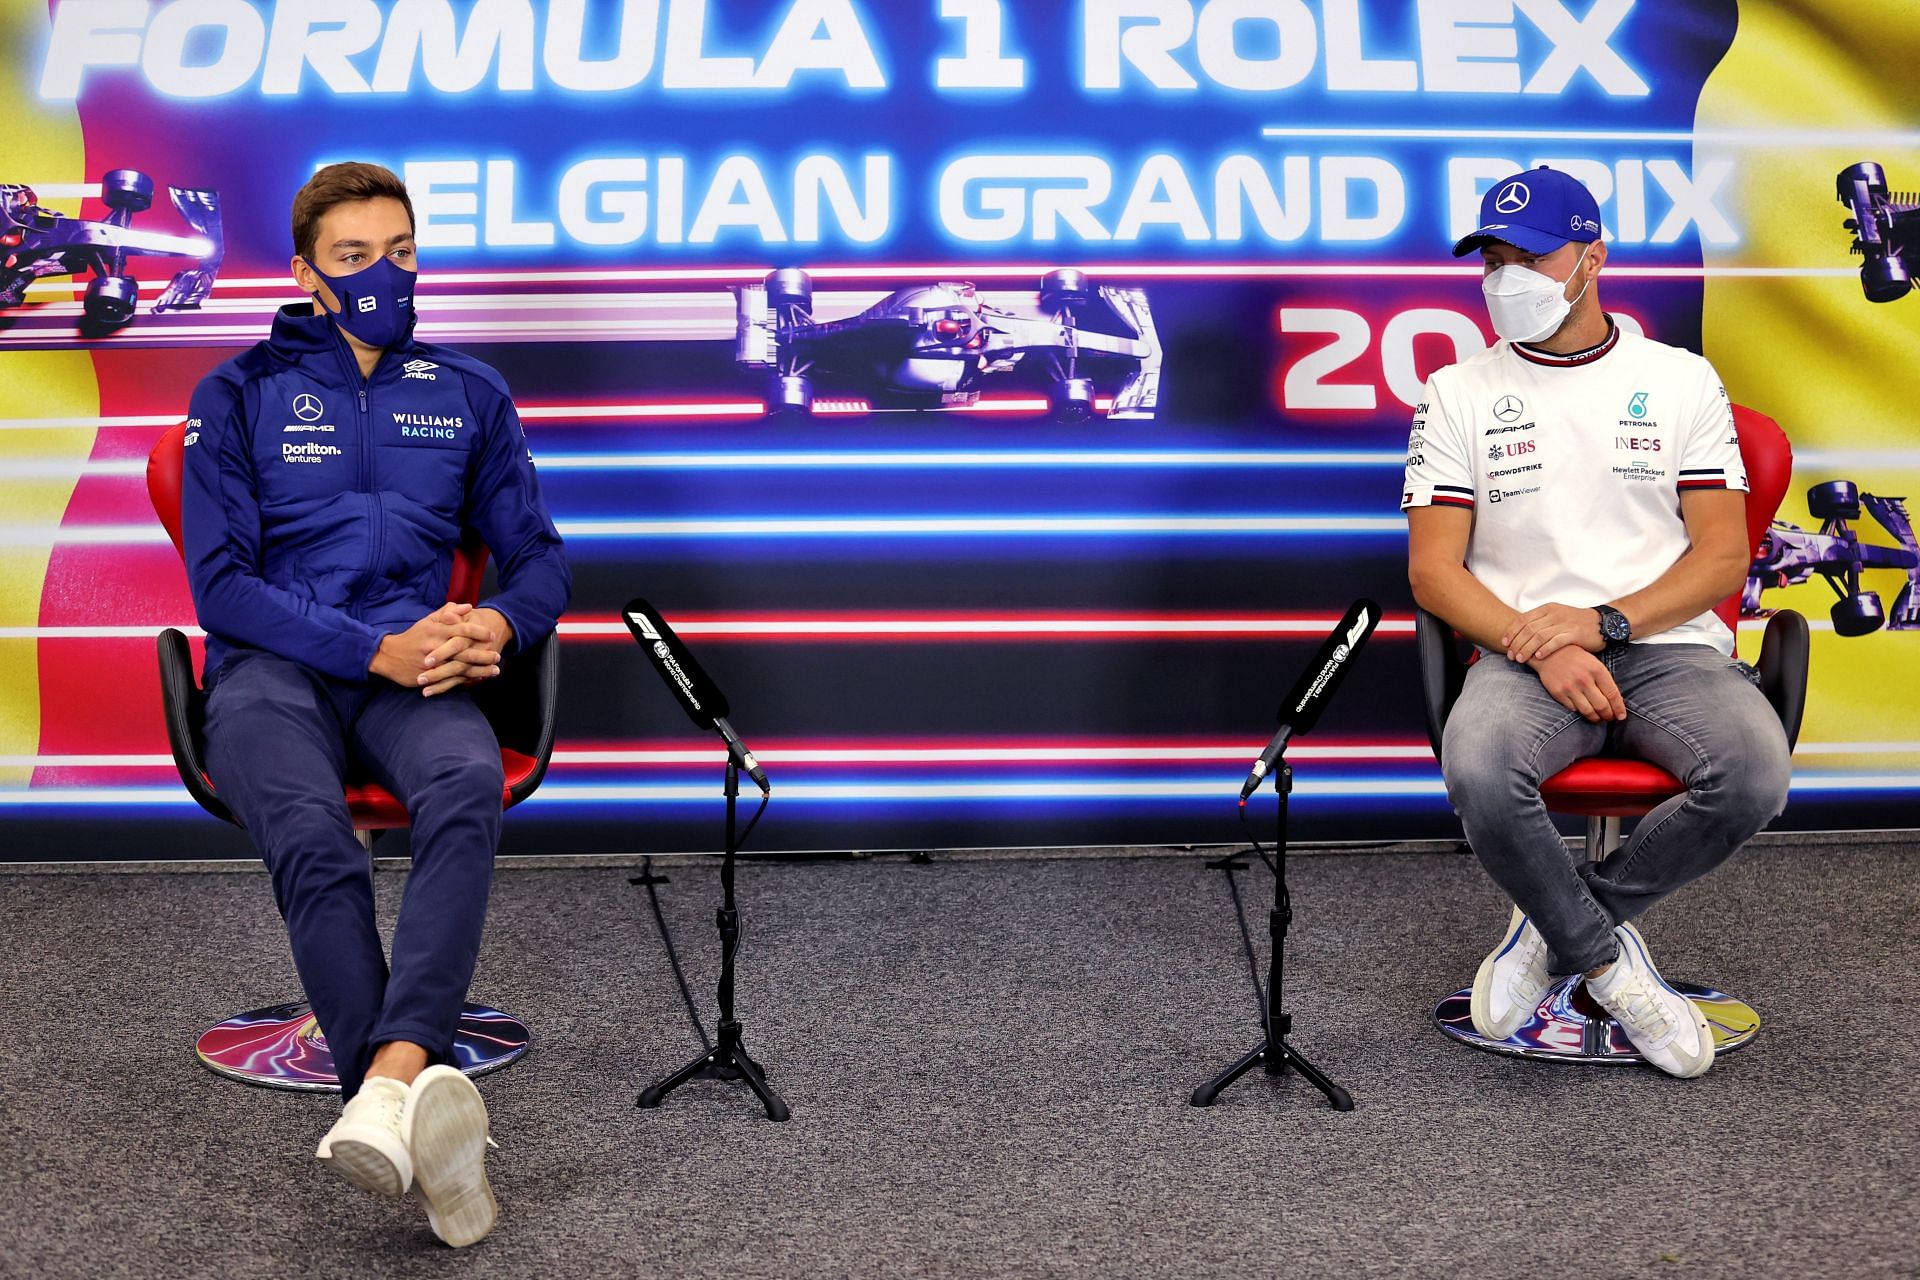 2021 F1 Grand Prix of Belgium - Valtteri Bottas (right) and his future Mercedes replacement George Russell